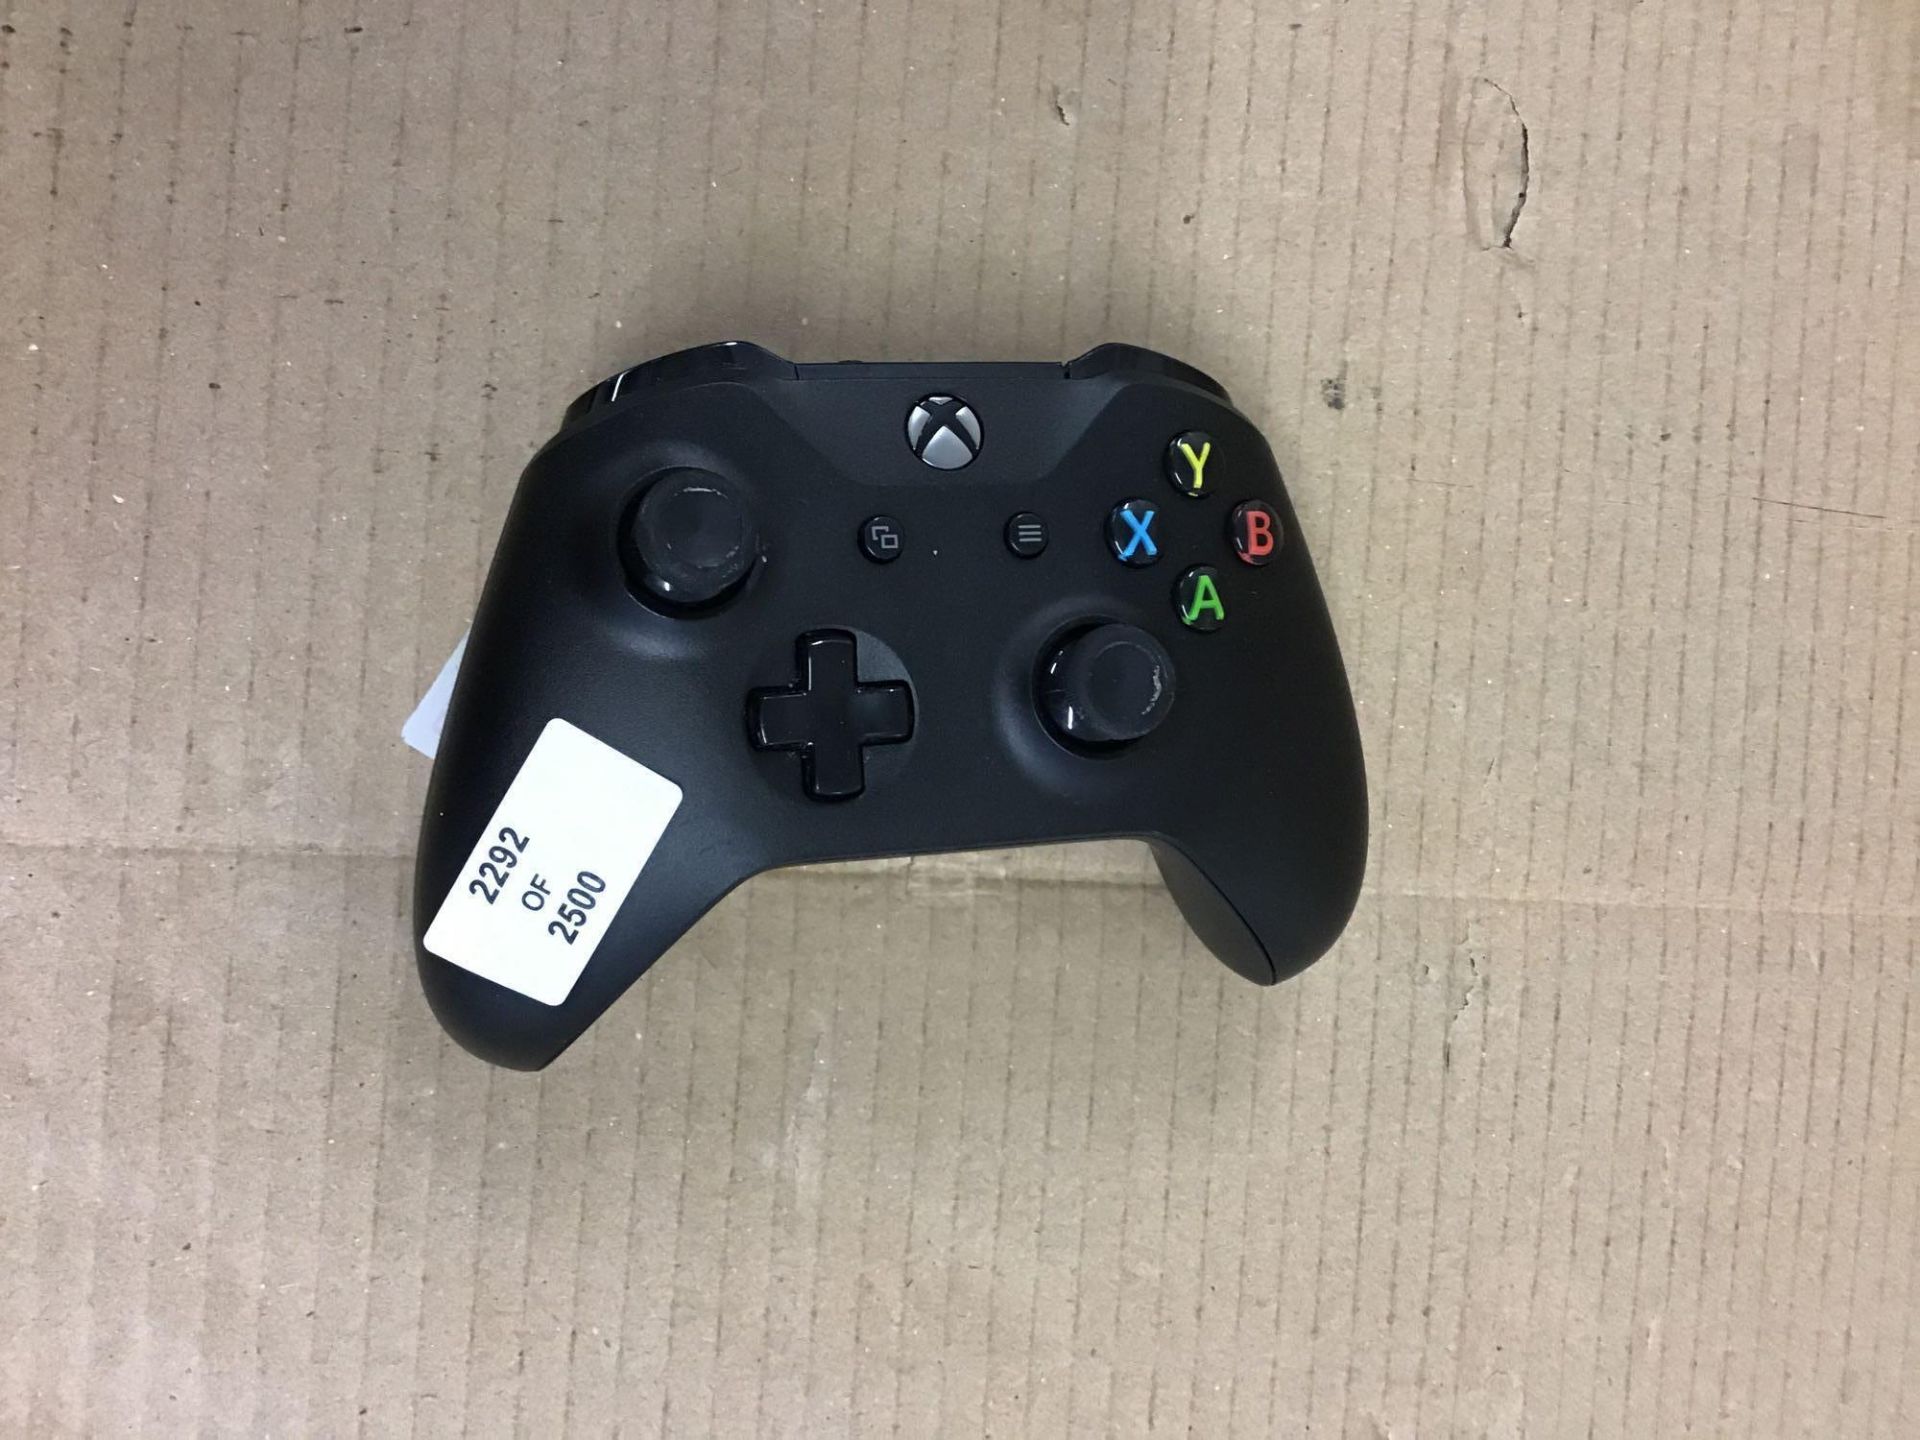 Official Xbox One Wireless Controller 3.5mm - Black (619/9582) - £39.99 RRP - Image 3 of 5